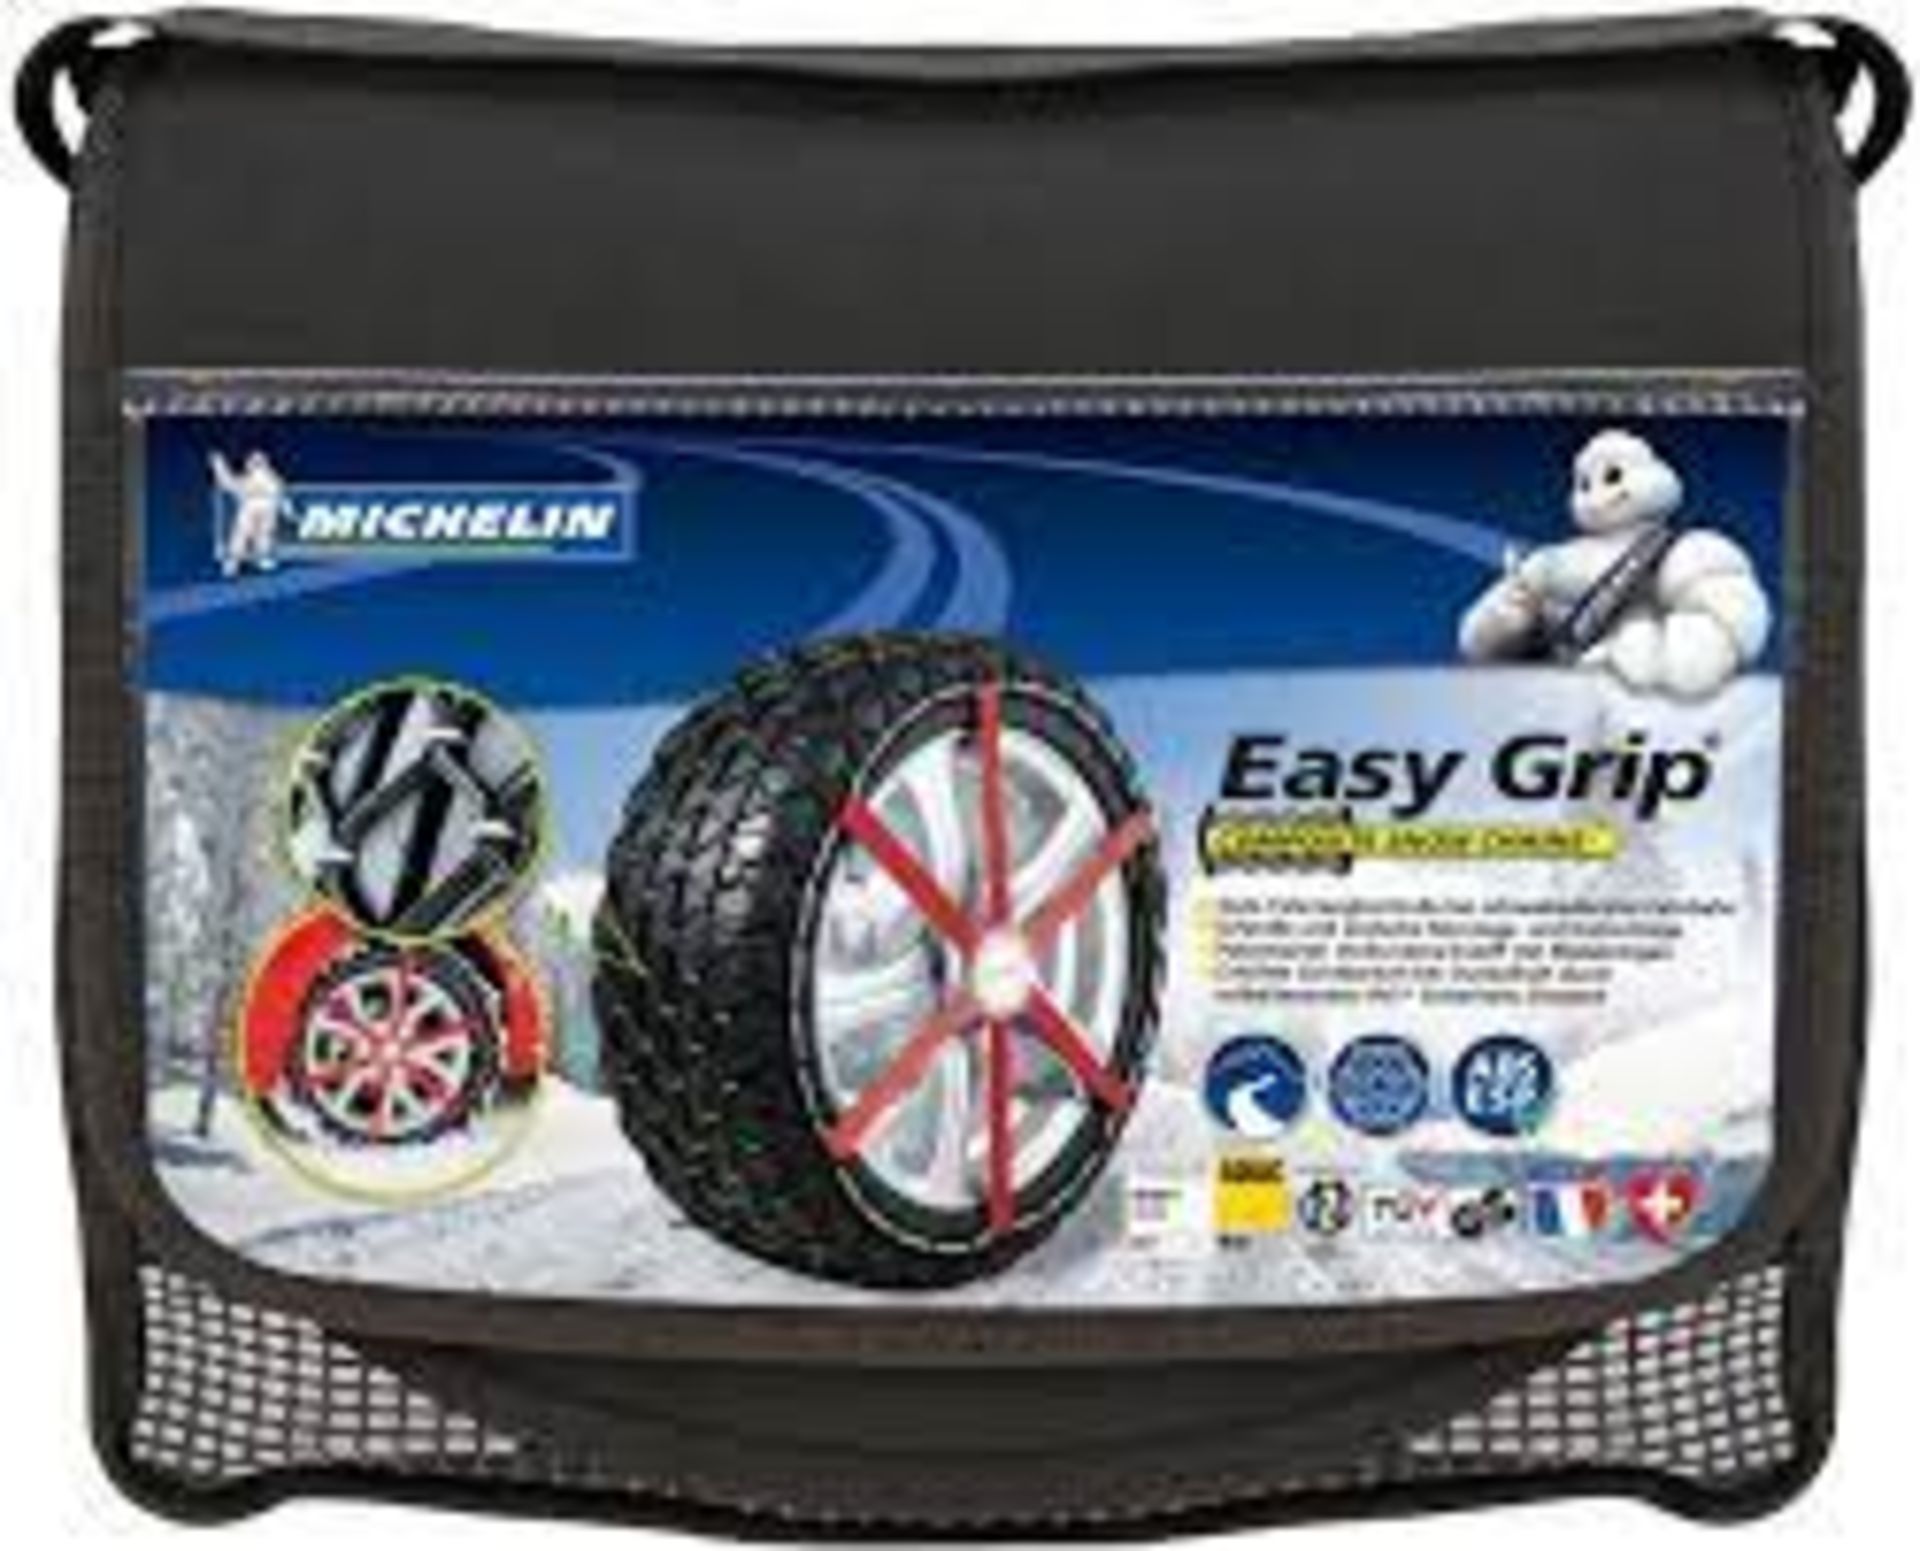 5 X NEW PACKAGED SETS OF Michelin 92302 Textile snow chains Easy Grip J11, ABS and ESP compatible,